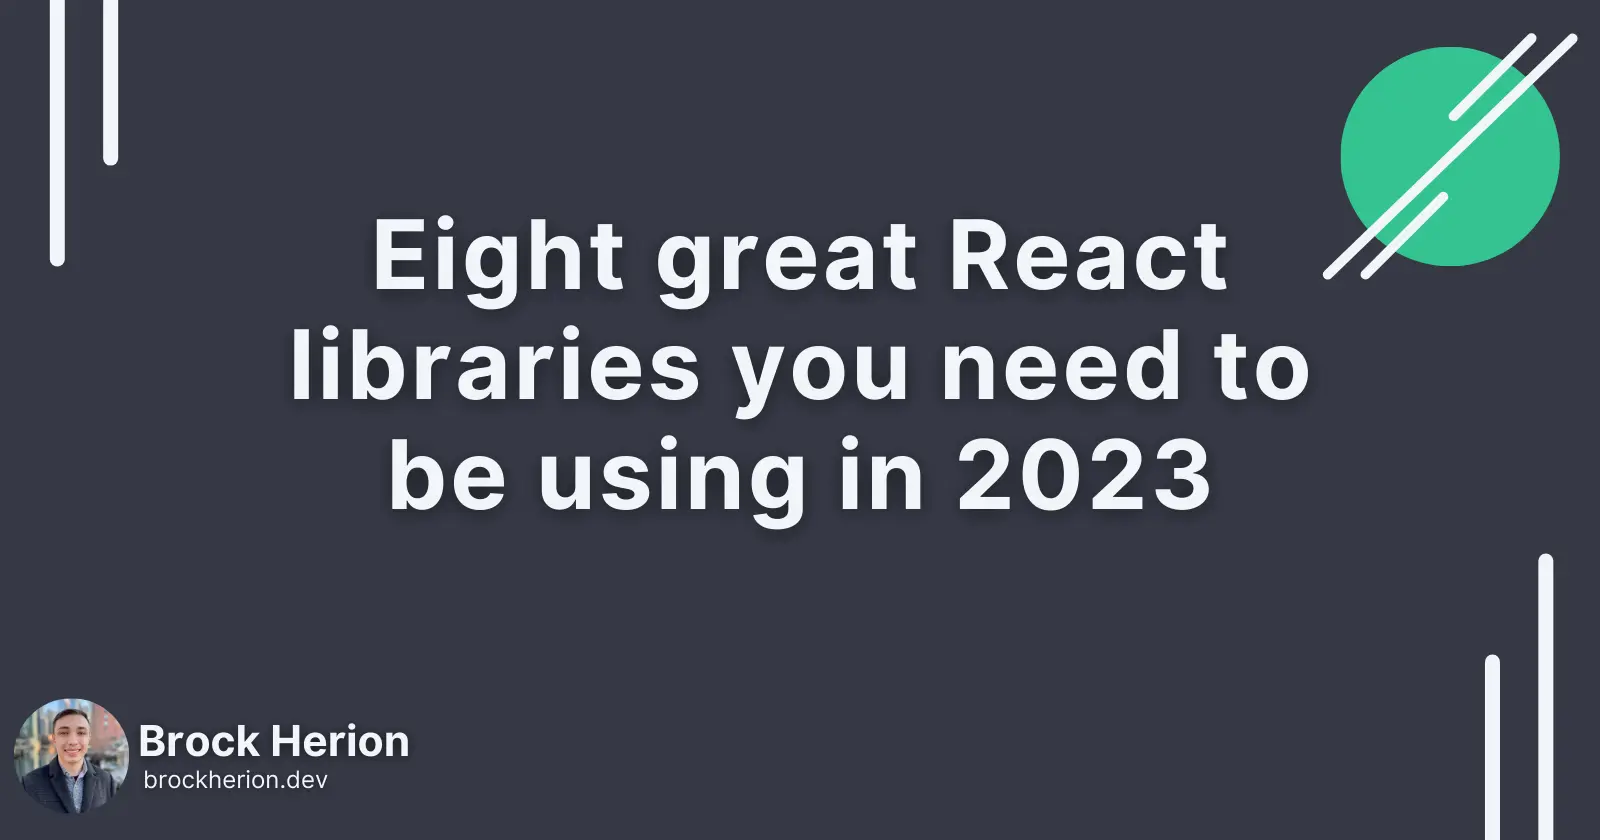 Eight great React libraries you need to be using in 2023